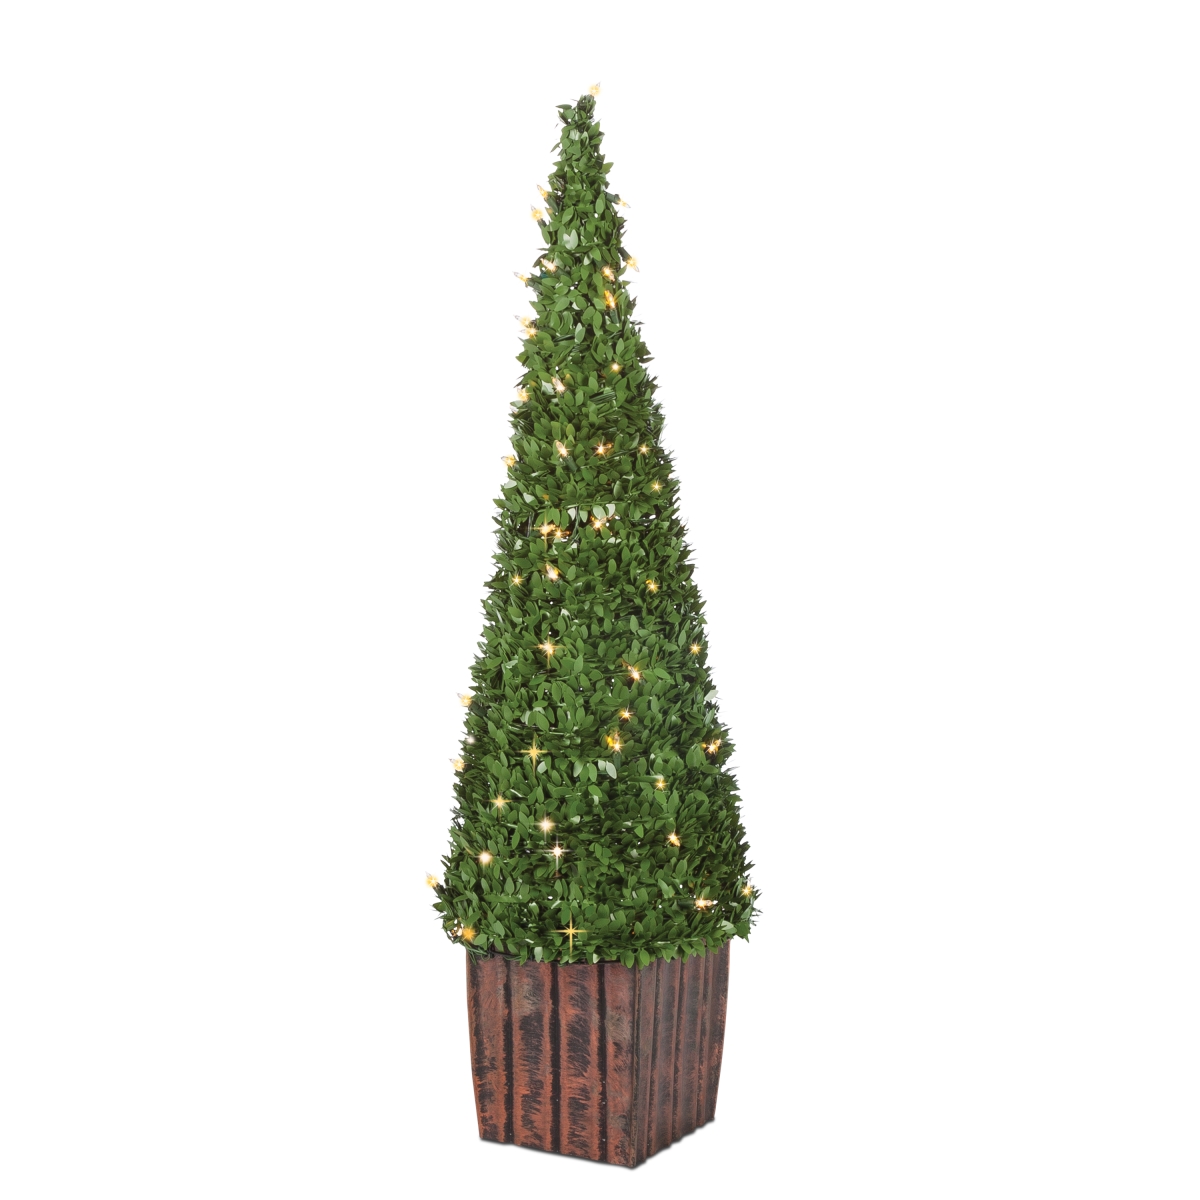 5257--35wwlede 3.5 Ft. Pre-lit Potted Faux Boxwood Tree With 100 Warm White Led Lights